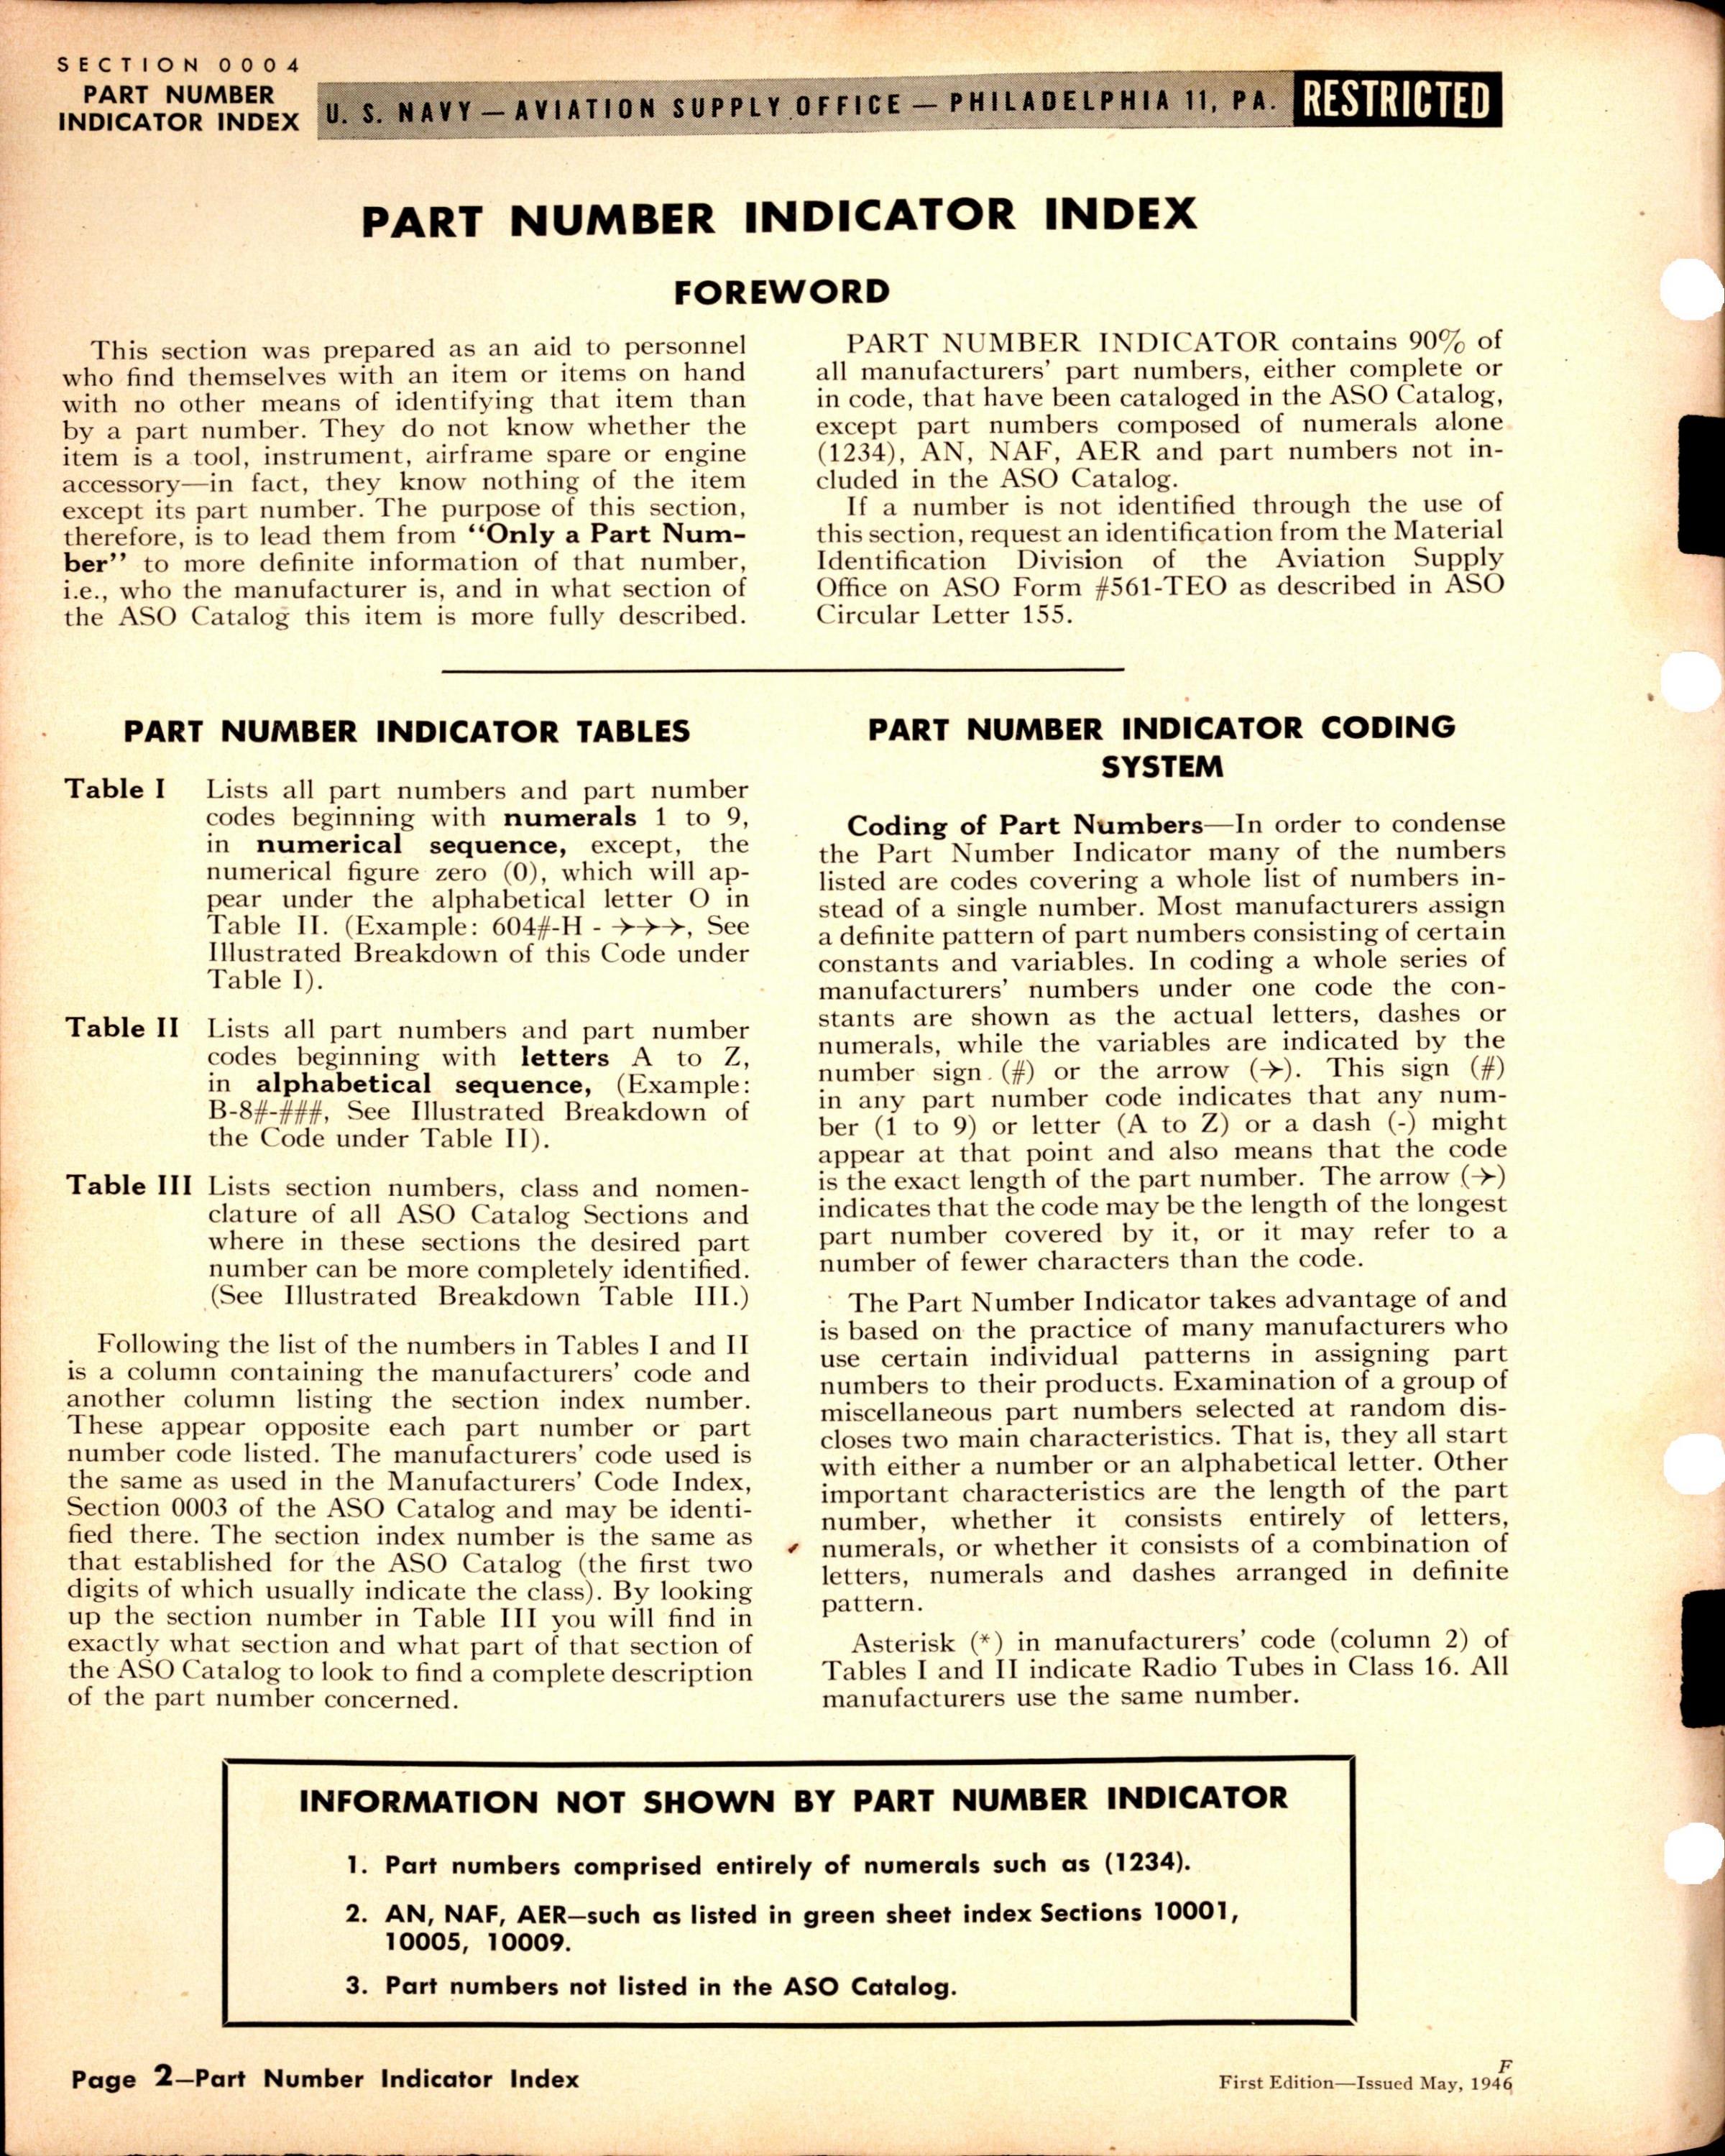 Sample page 2 from AirCorps Library document: Part No. Indicator Index